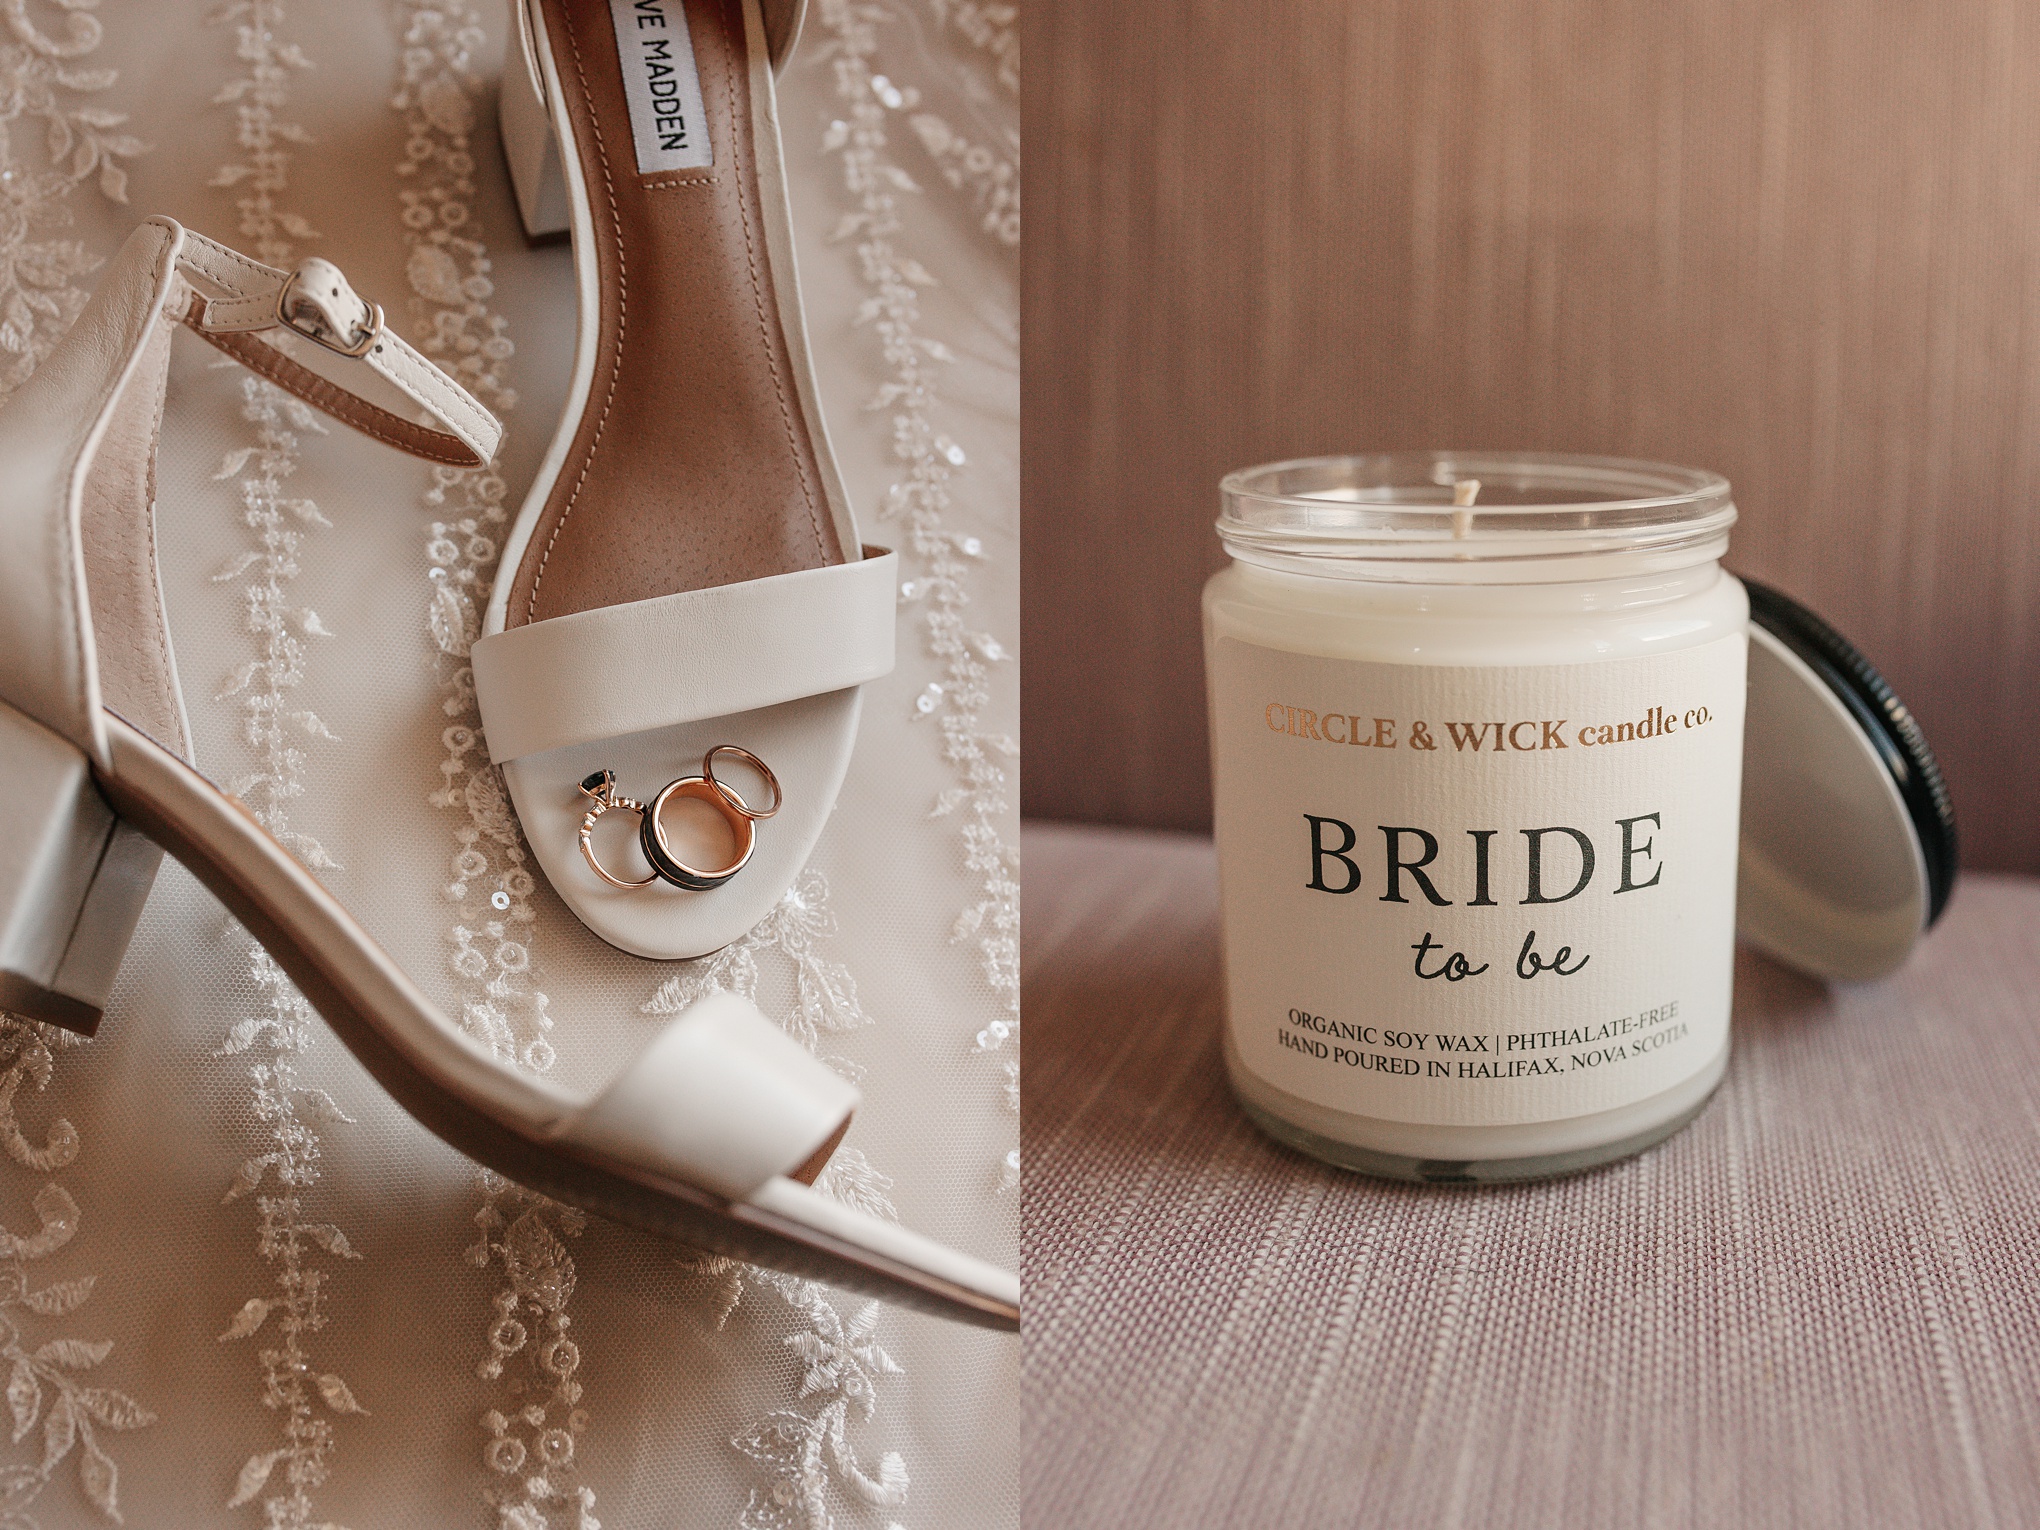 Bride to be candle